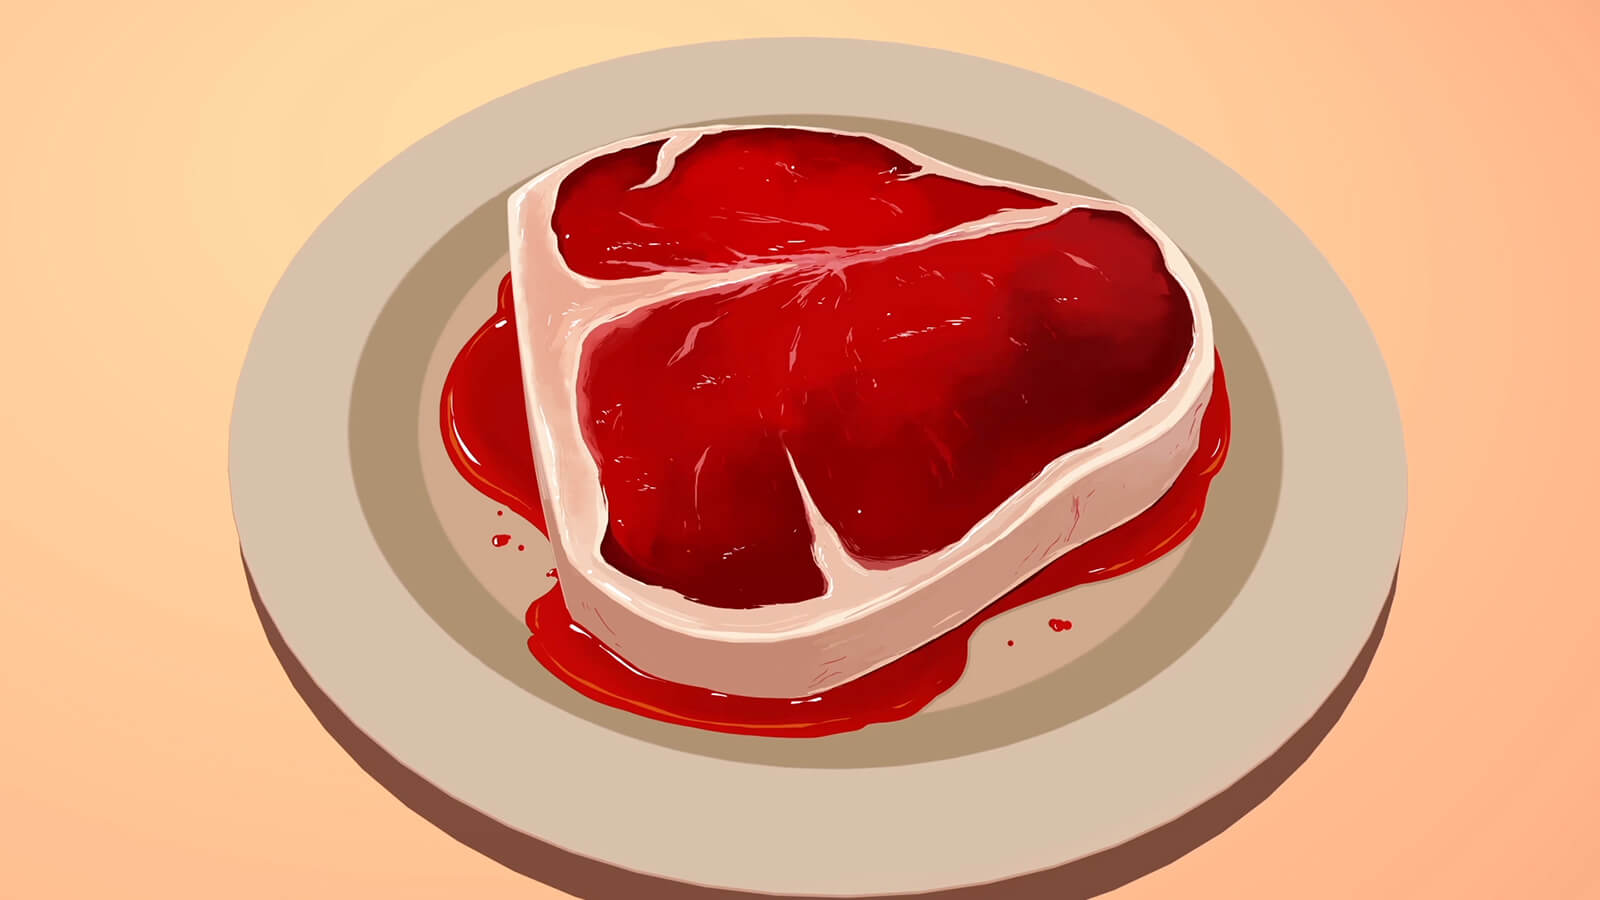 A closeup of a glistening uncooked steak on a white plate. Blood puddles underneath it.